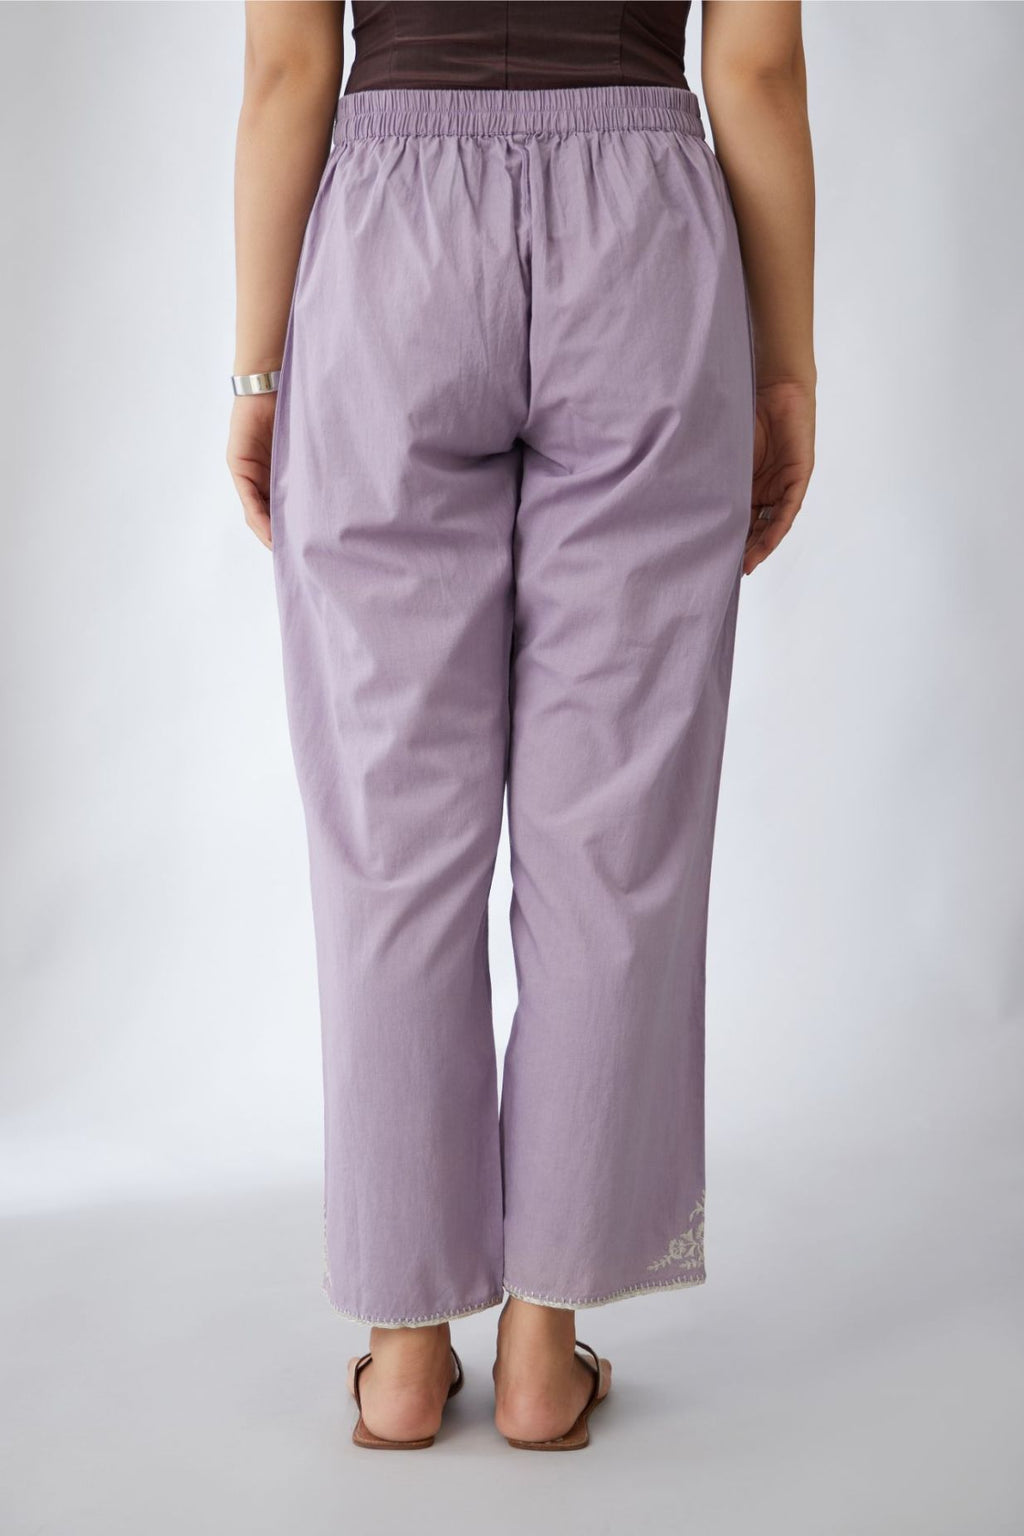 Purple cotton straight pants with silver embroidery detailing at bottom hem (Pants)